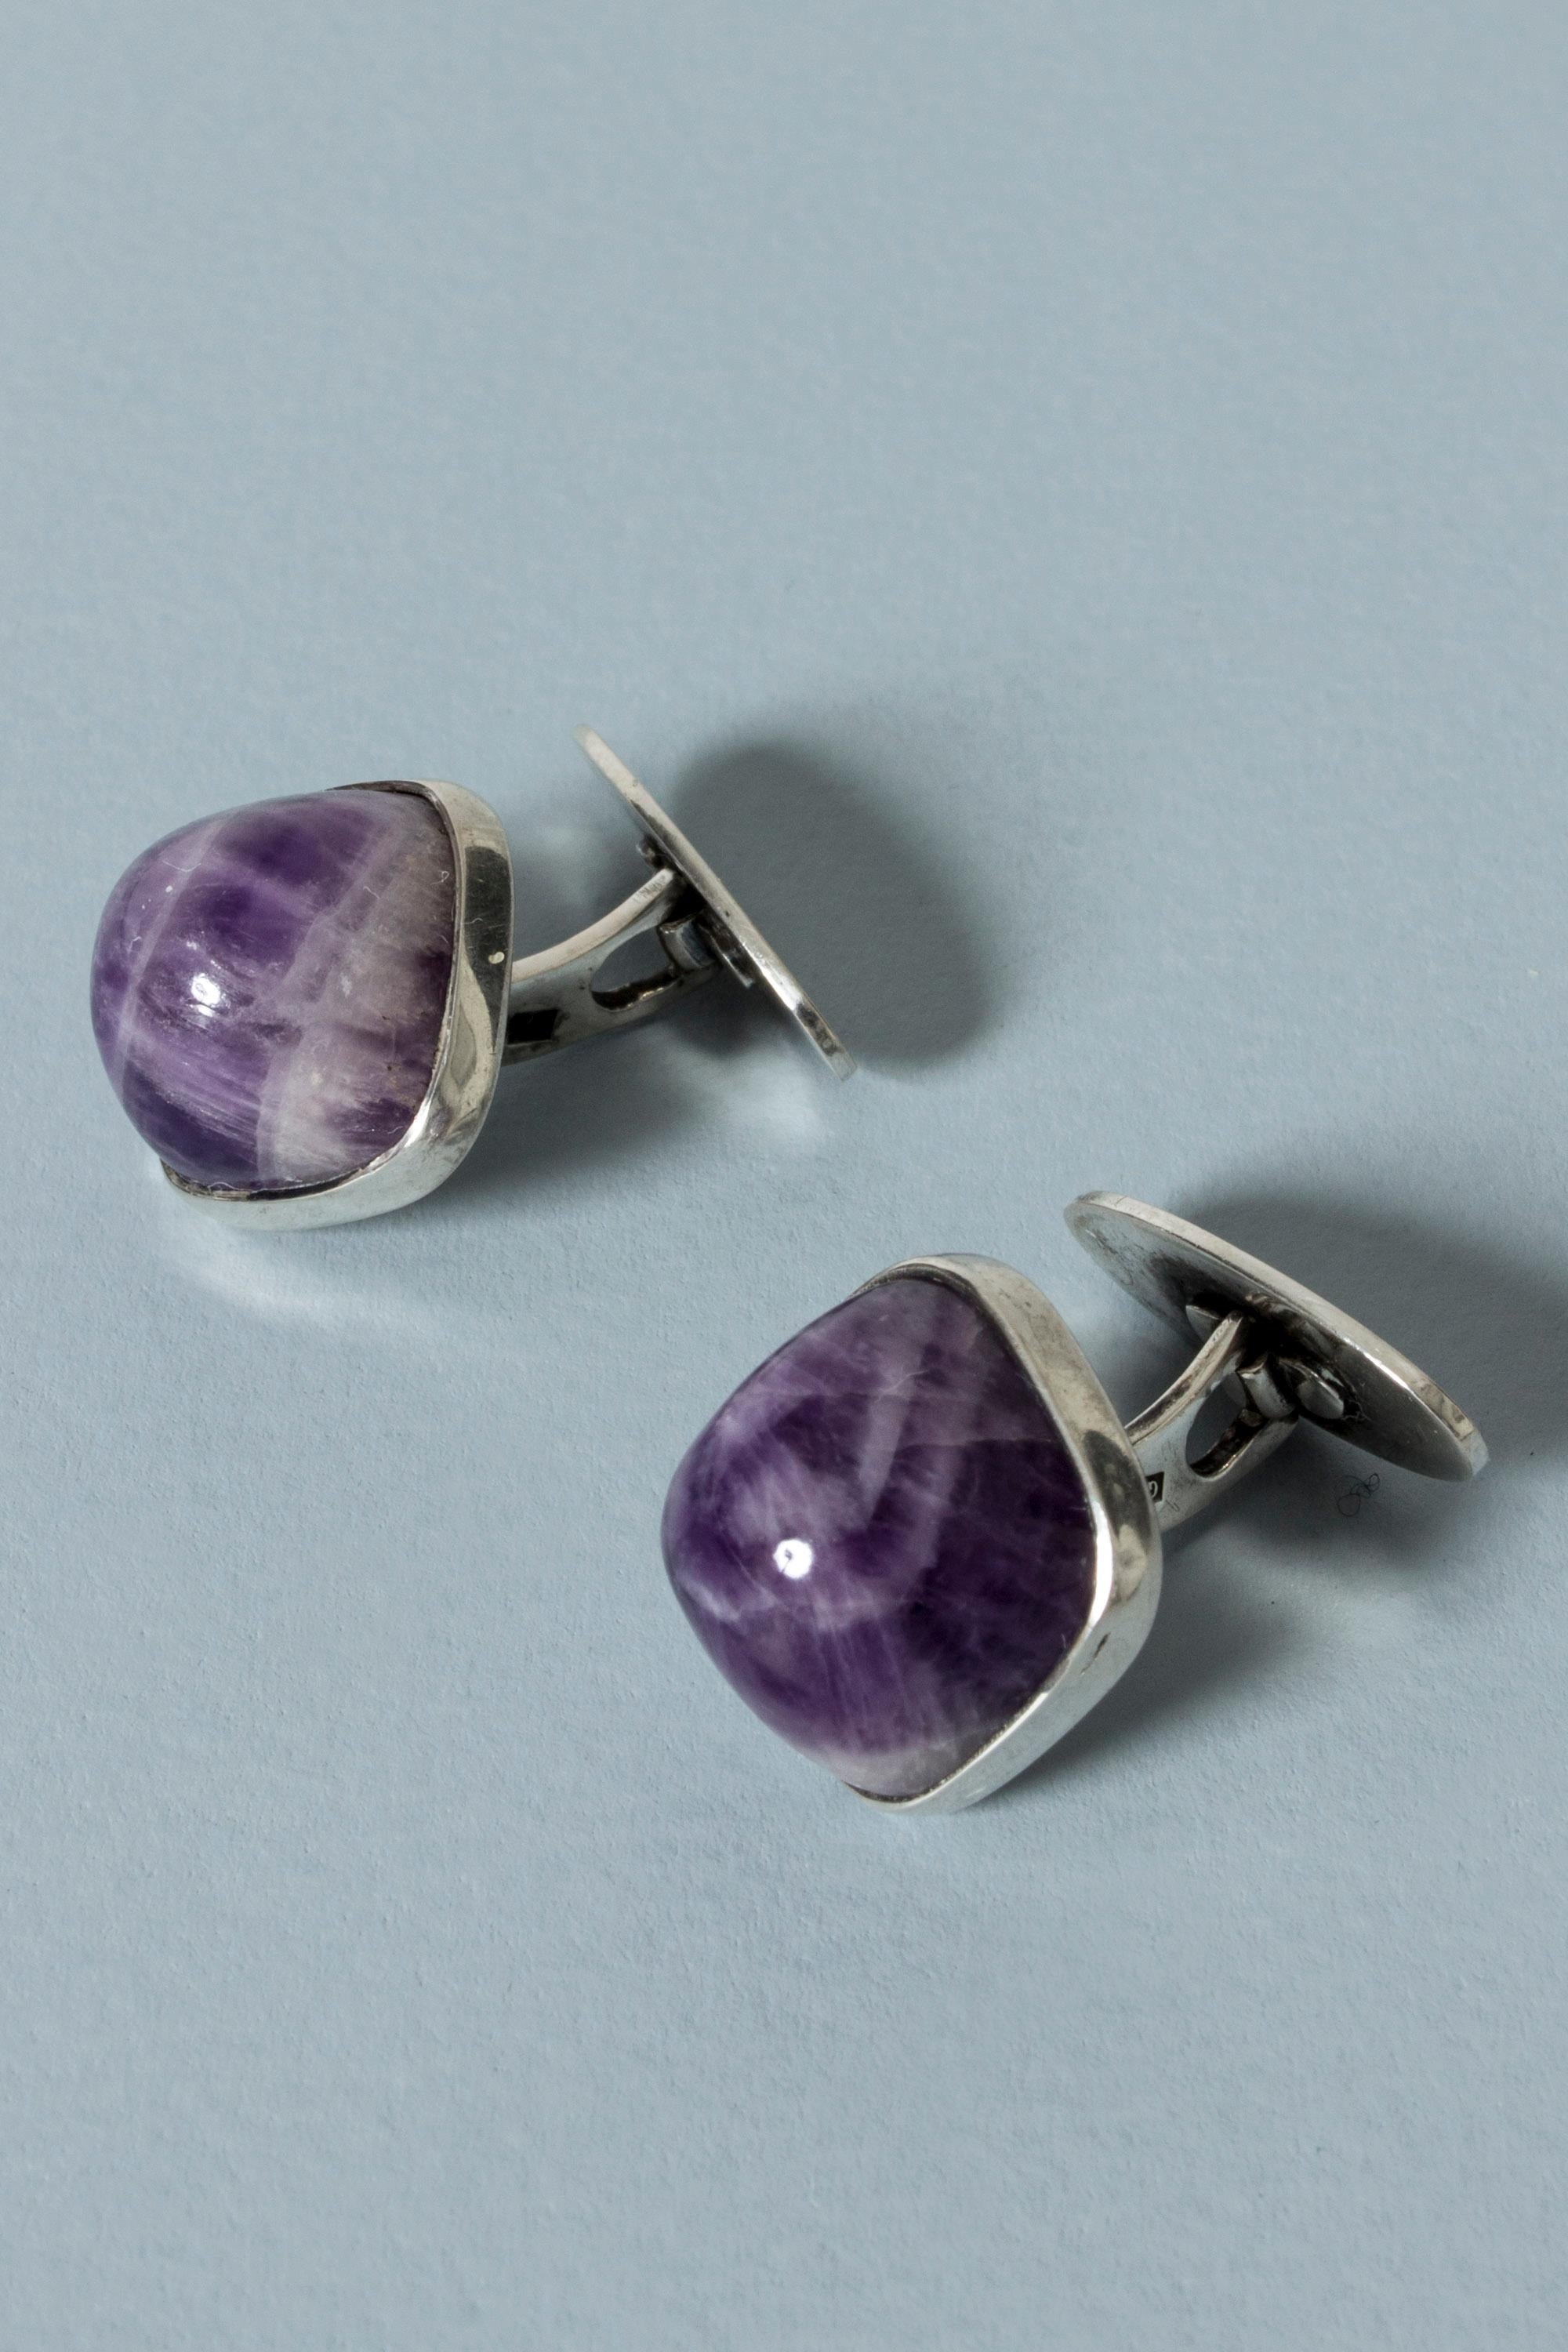 Pair of cool silver and amethyst cufflinks from Kaplans, with large, rounded, protruding stones. Layers of white in the stones.
